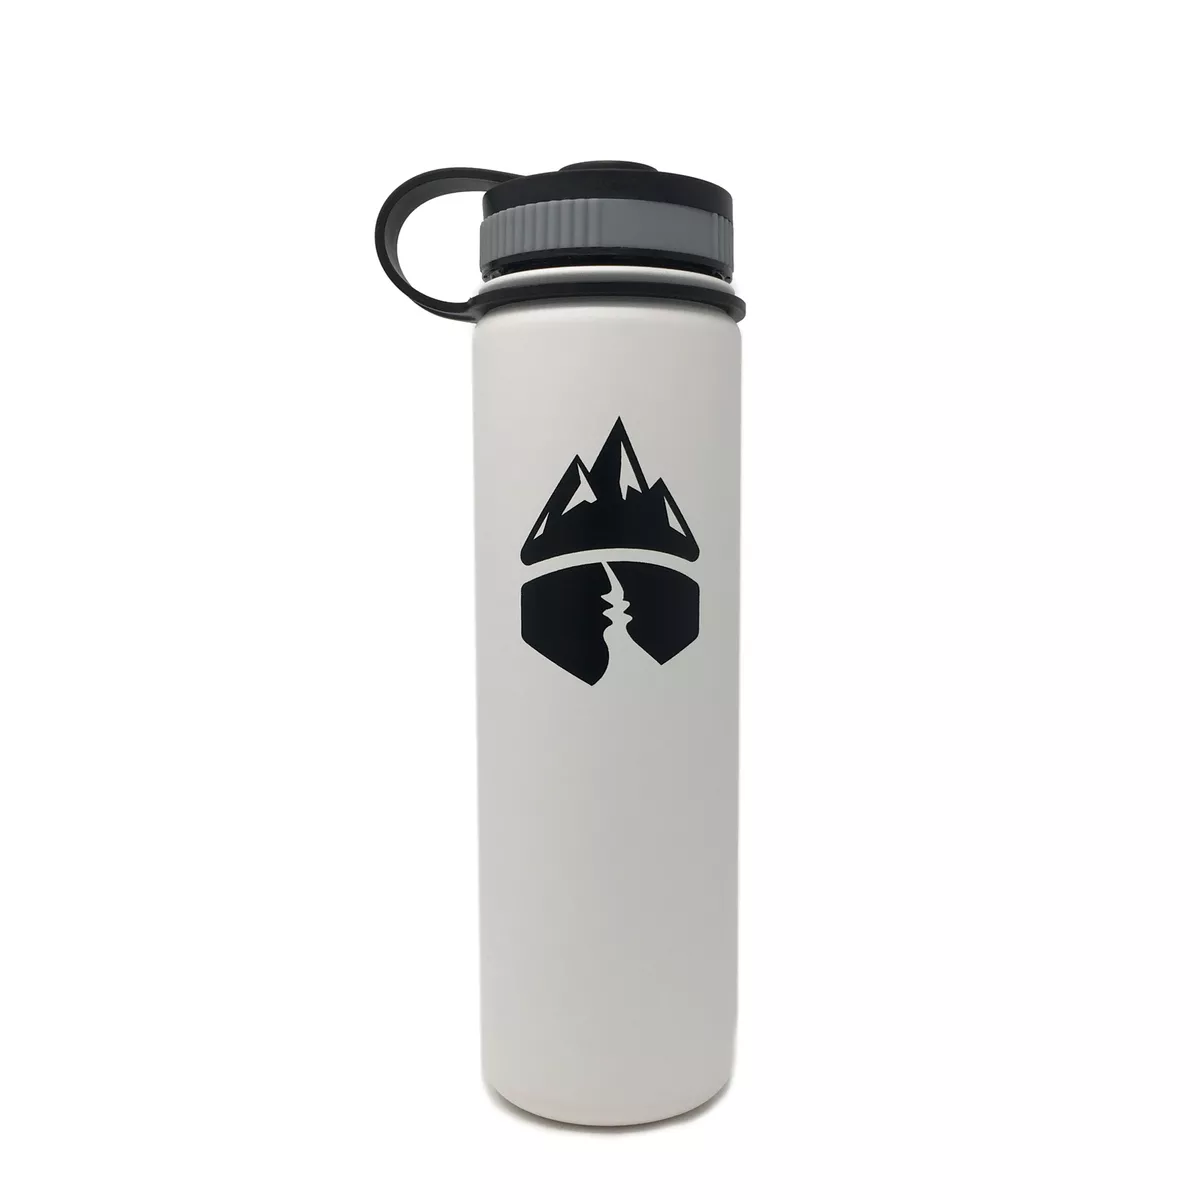 Good & Well Supply Co.  Camping & Hiking Stainless Steel Insulated Mu